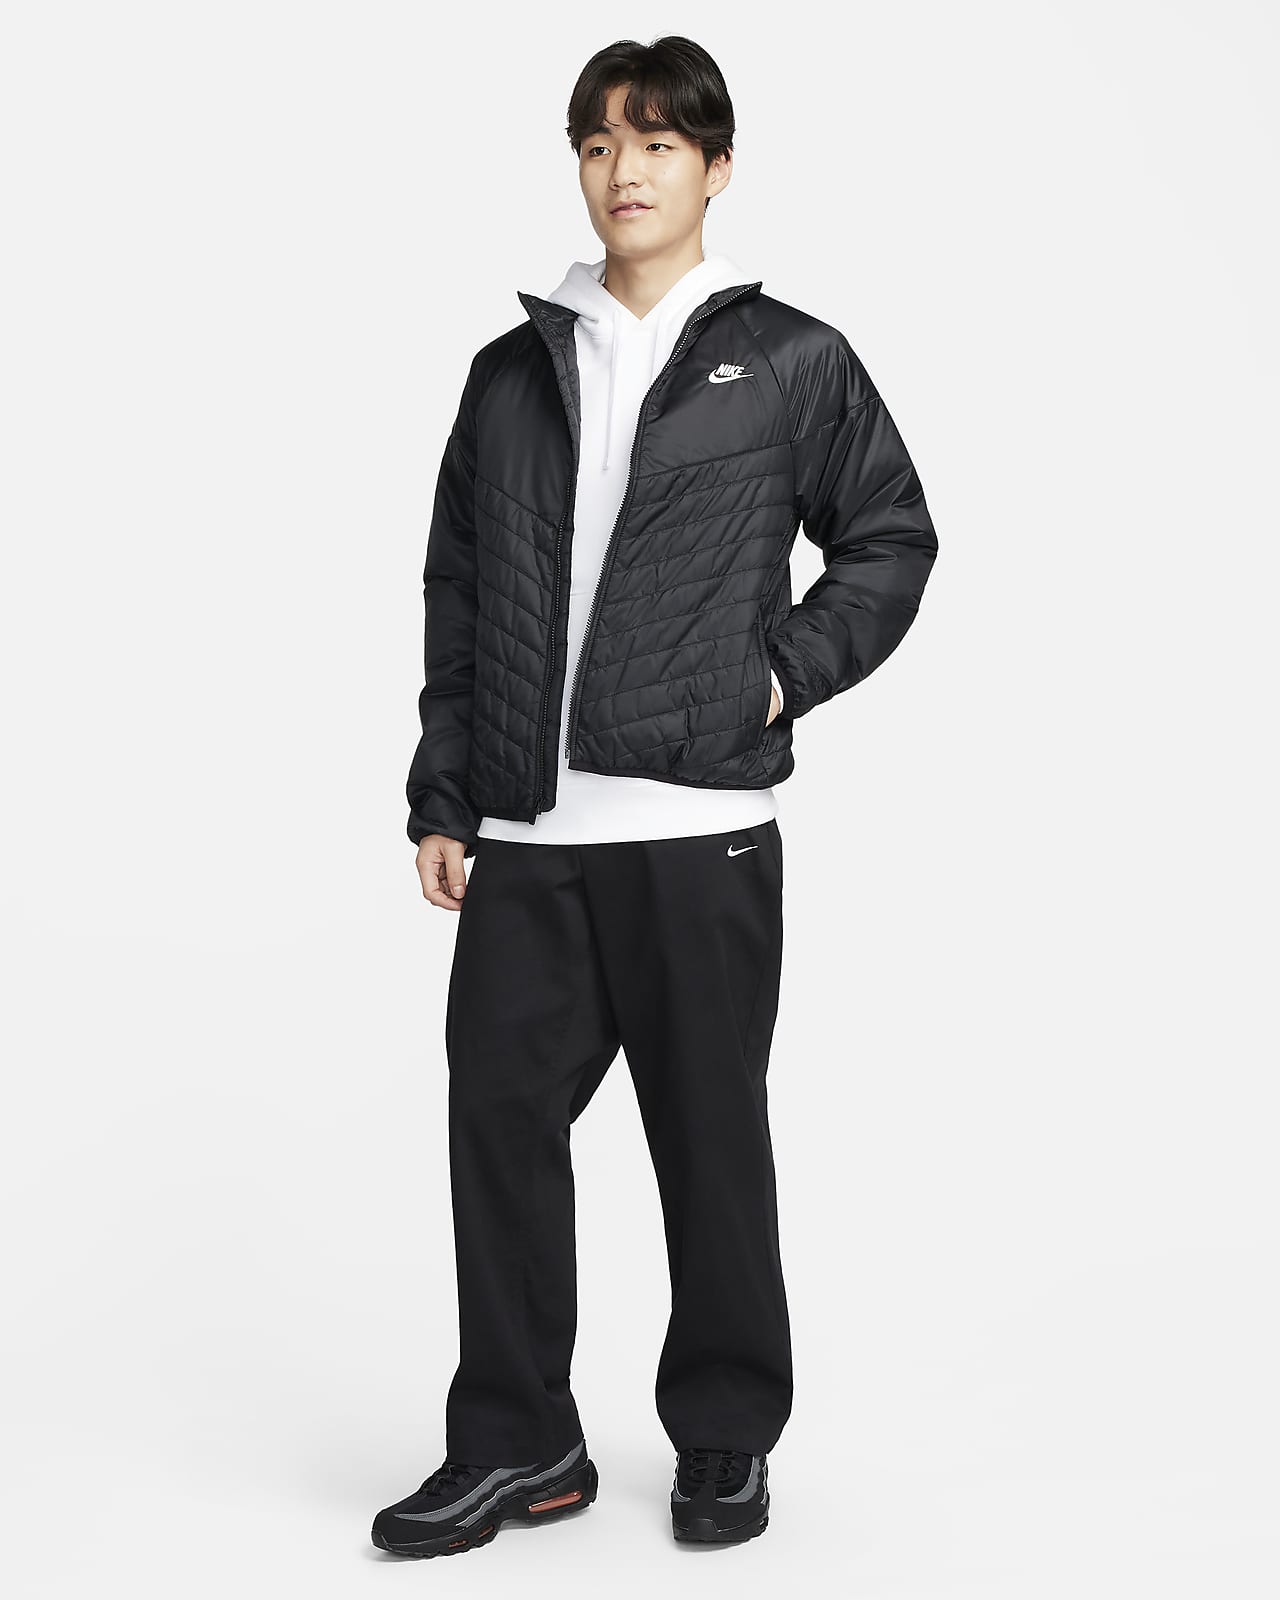 https://static.nike.com/a/images/t_PDP_1280_v1/f_auto,q_auto:eco/0d792ed8-e820-493e-8c76-dadc8234d971/sportswear-windrunner-midweight-puffer-jacket-WWnd5N.png